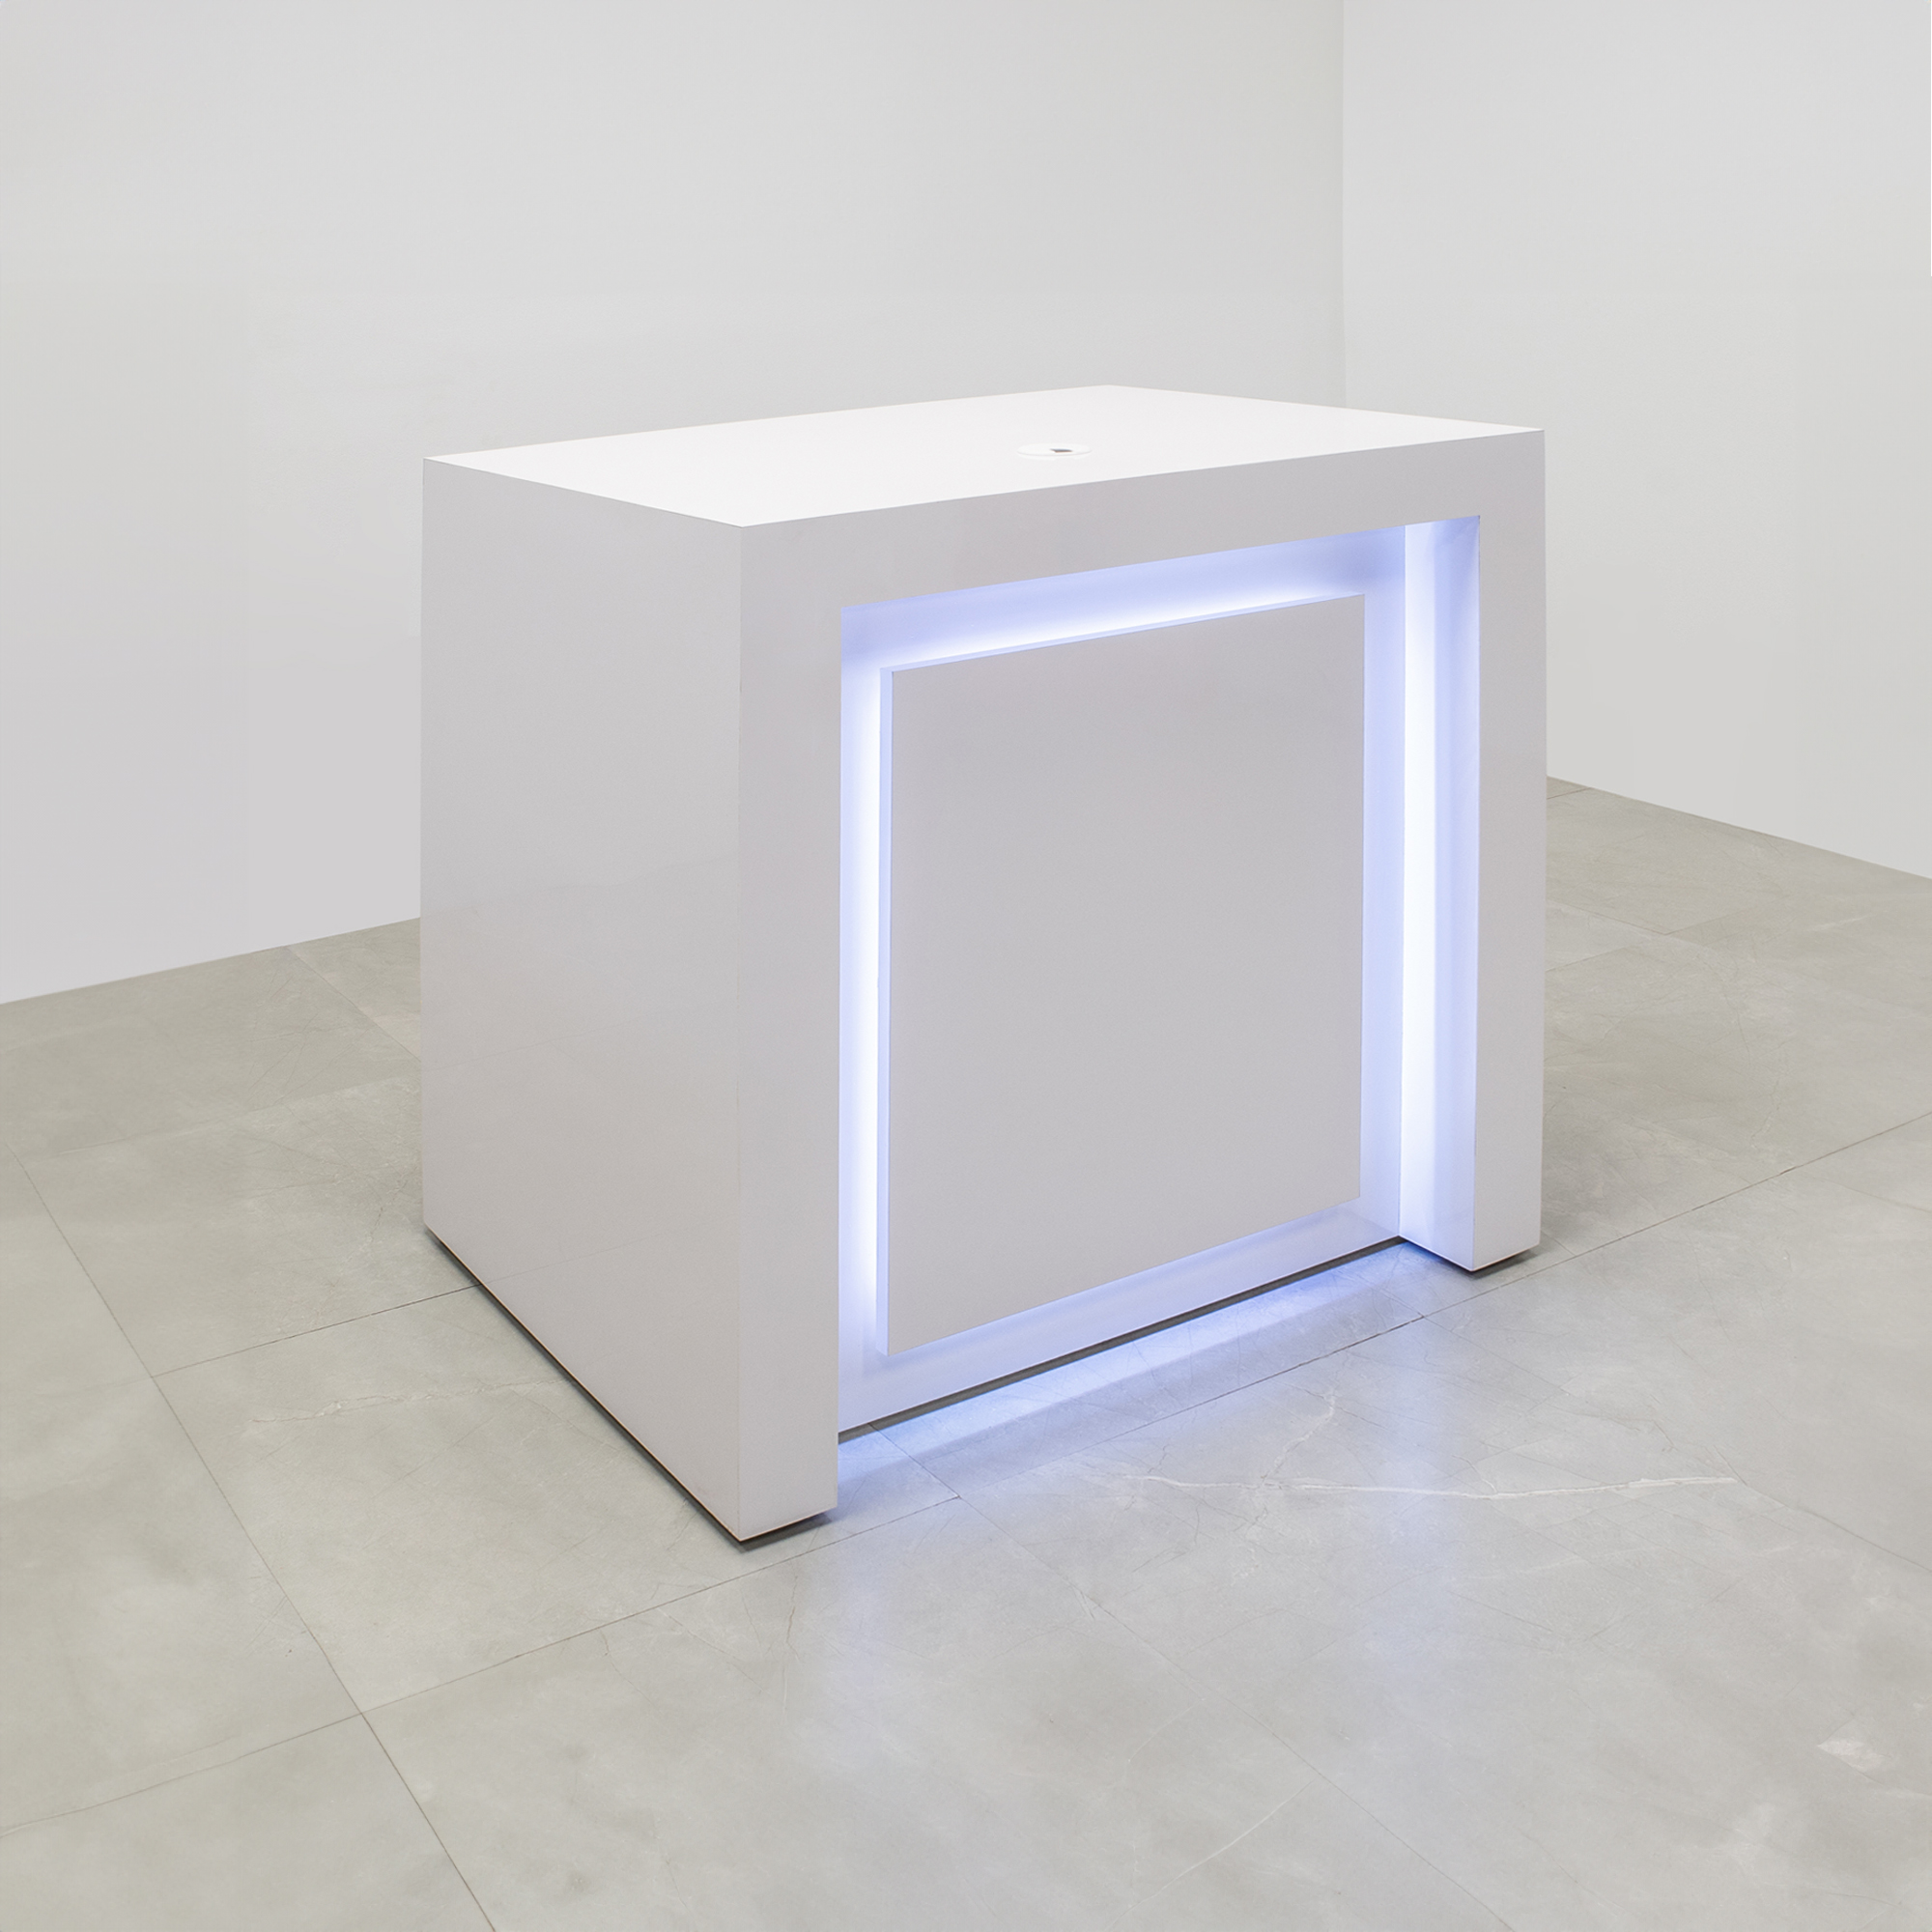 New York Retail CUstom Reception Desk in white matte laminate front panel and workspace, with multi-colored LED shown here.